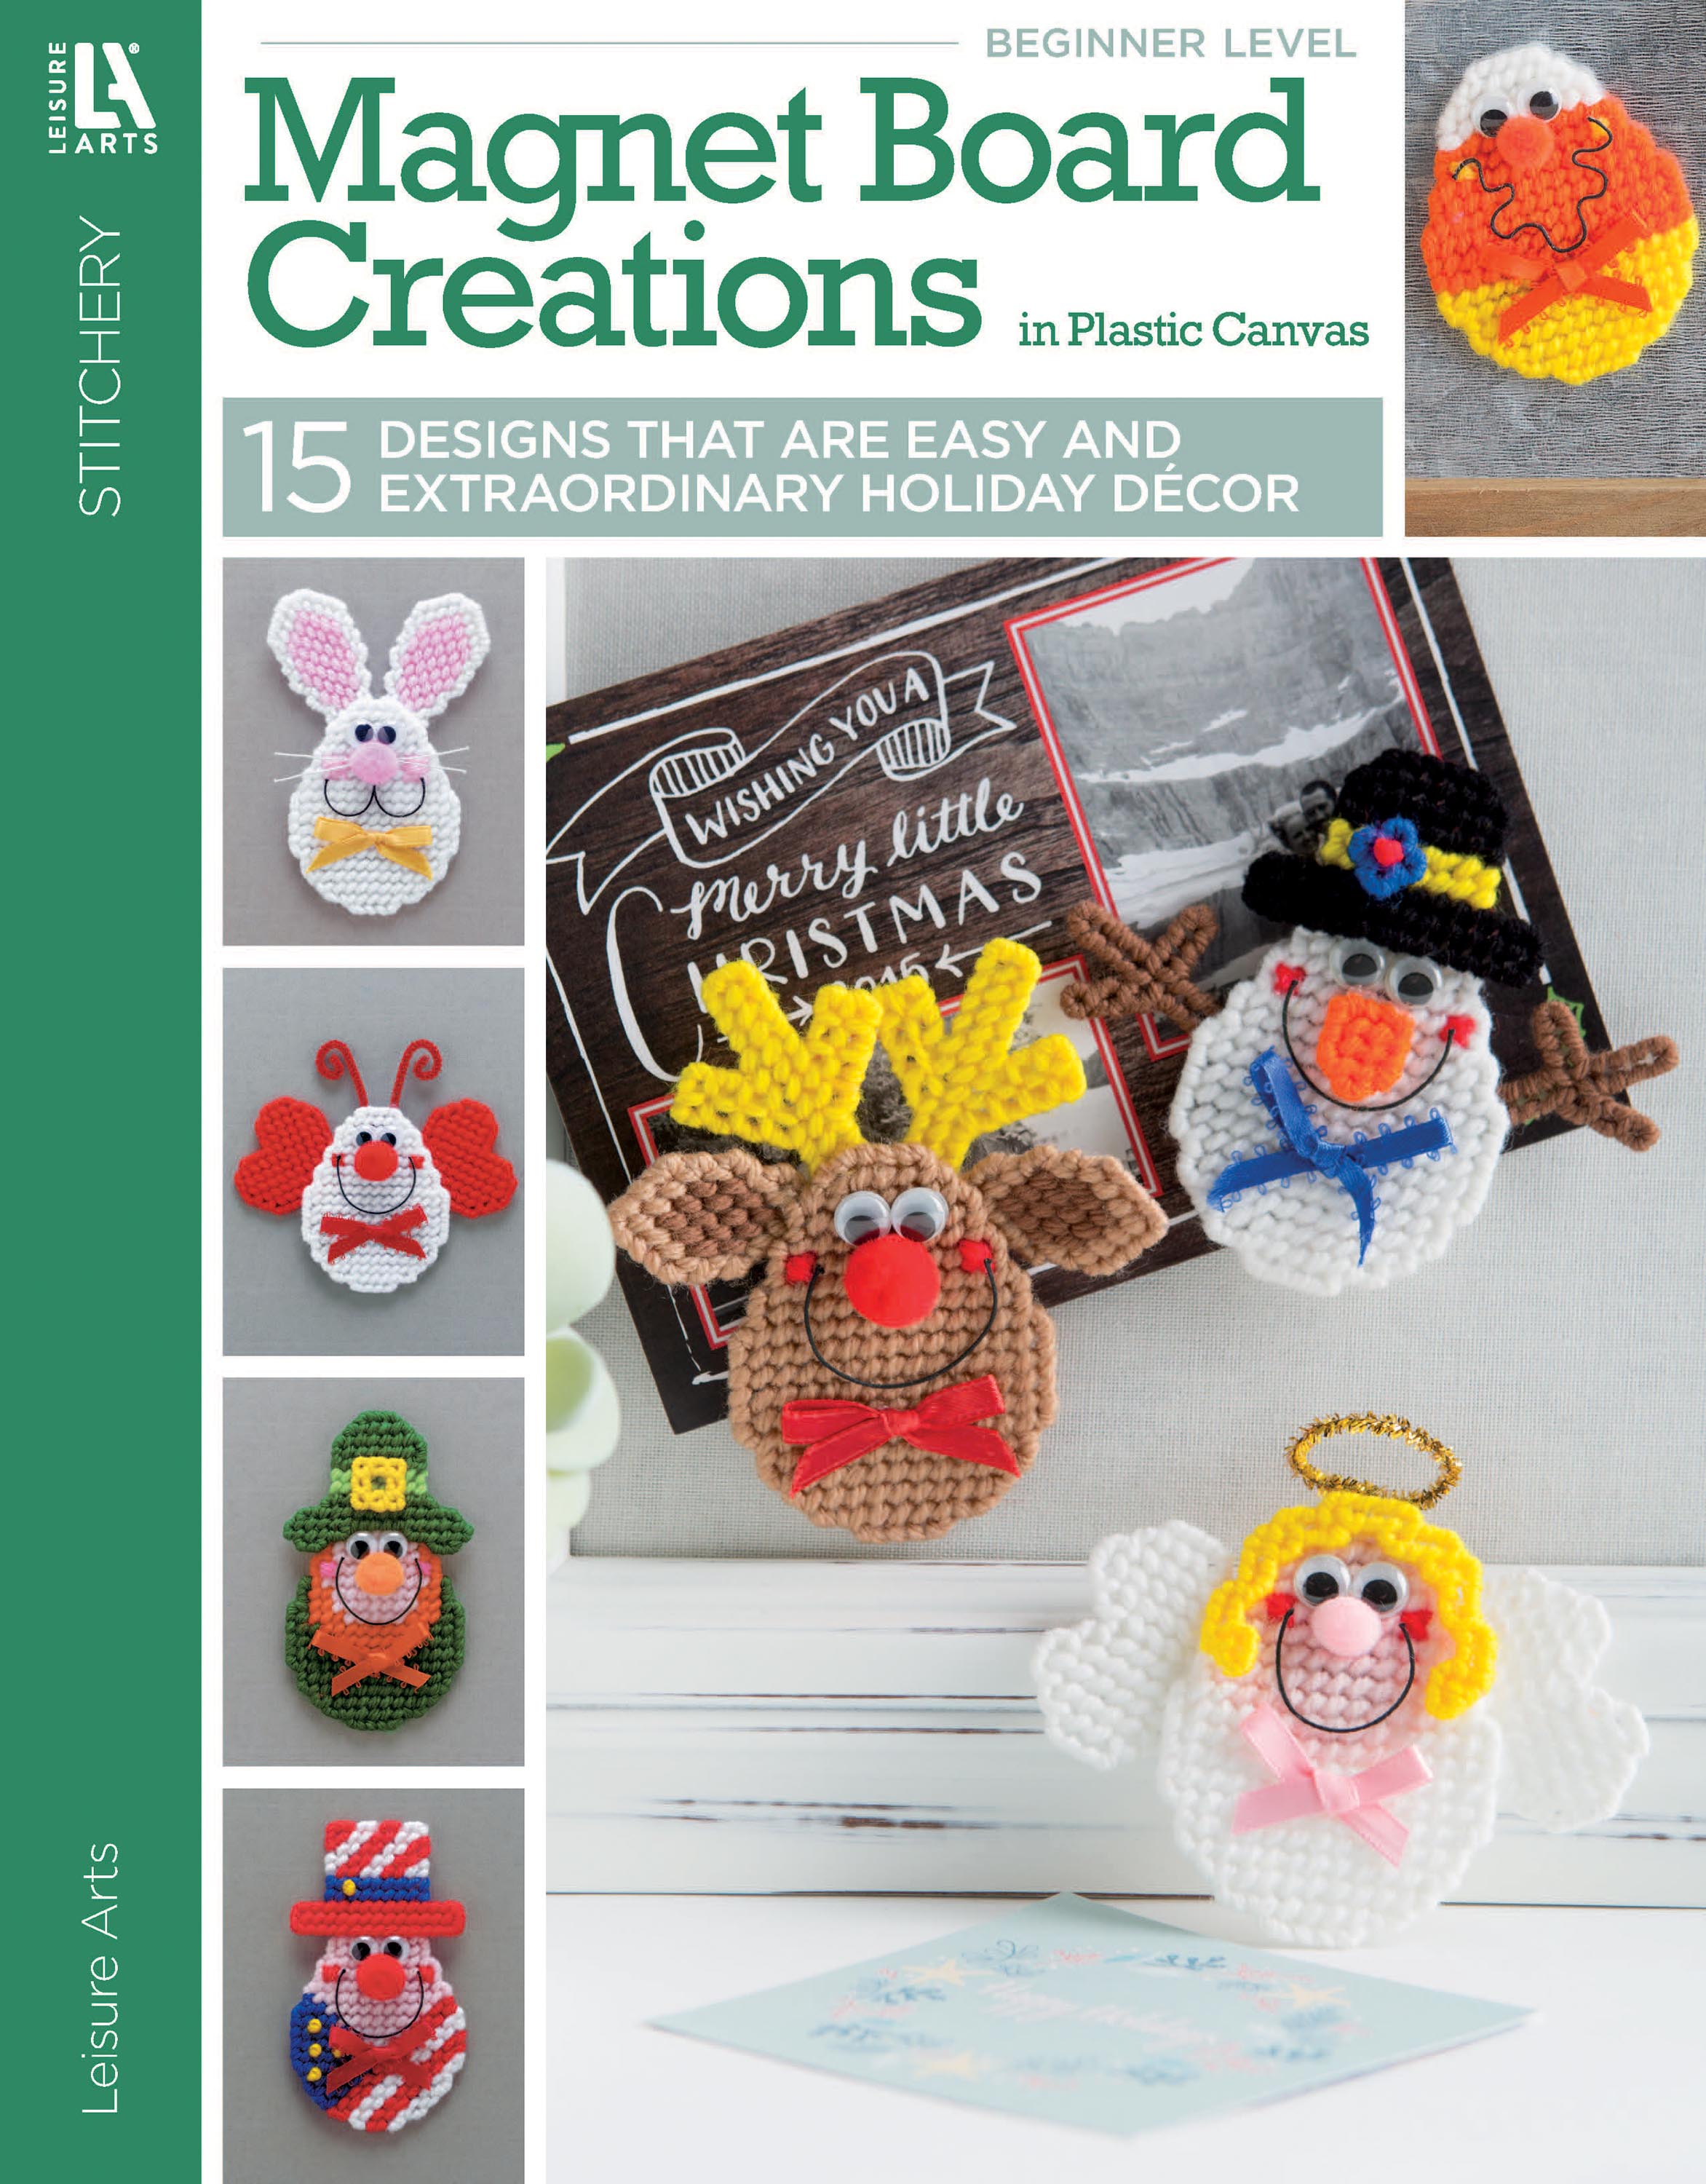 Plastic Canvas - Books and Patterns - Page 4 - Leisure Arts